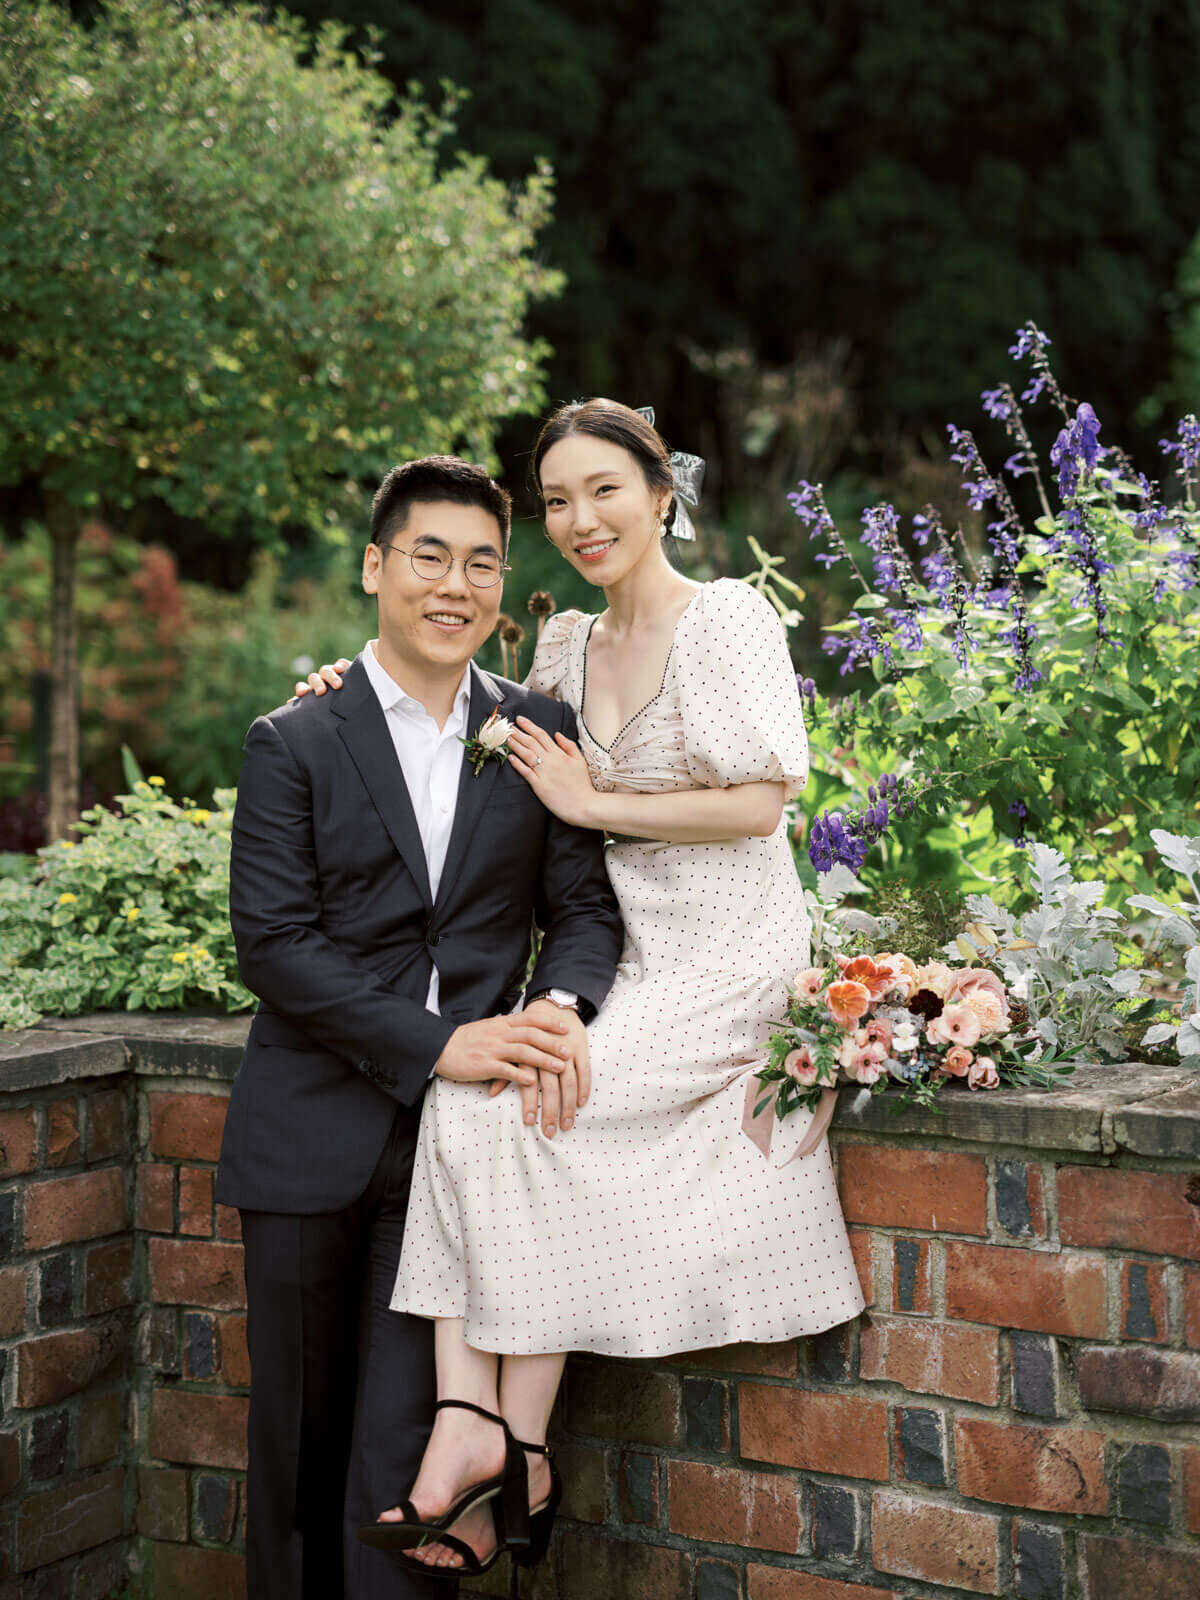 The engaged couple amidst a lovely garden with beautiful flowers at Planting Fields Arboretum, NY. Image by Jenny Fu Studio